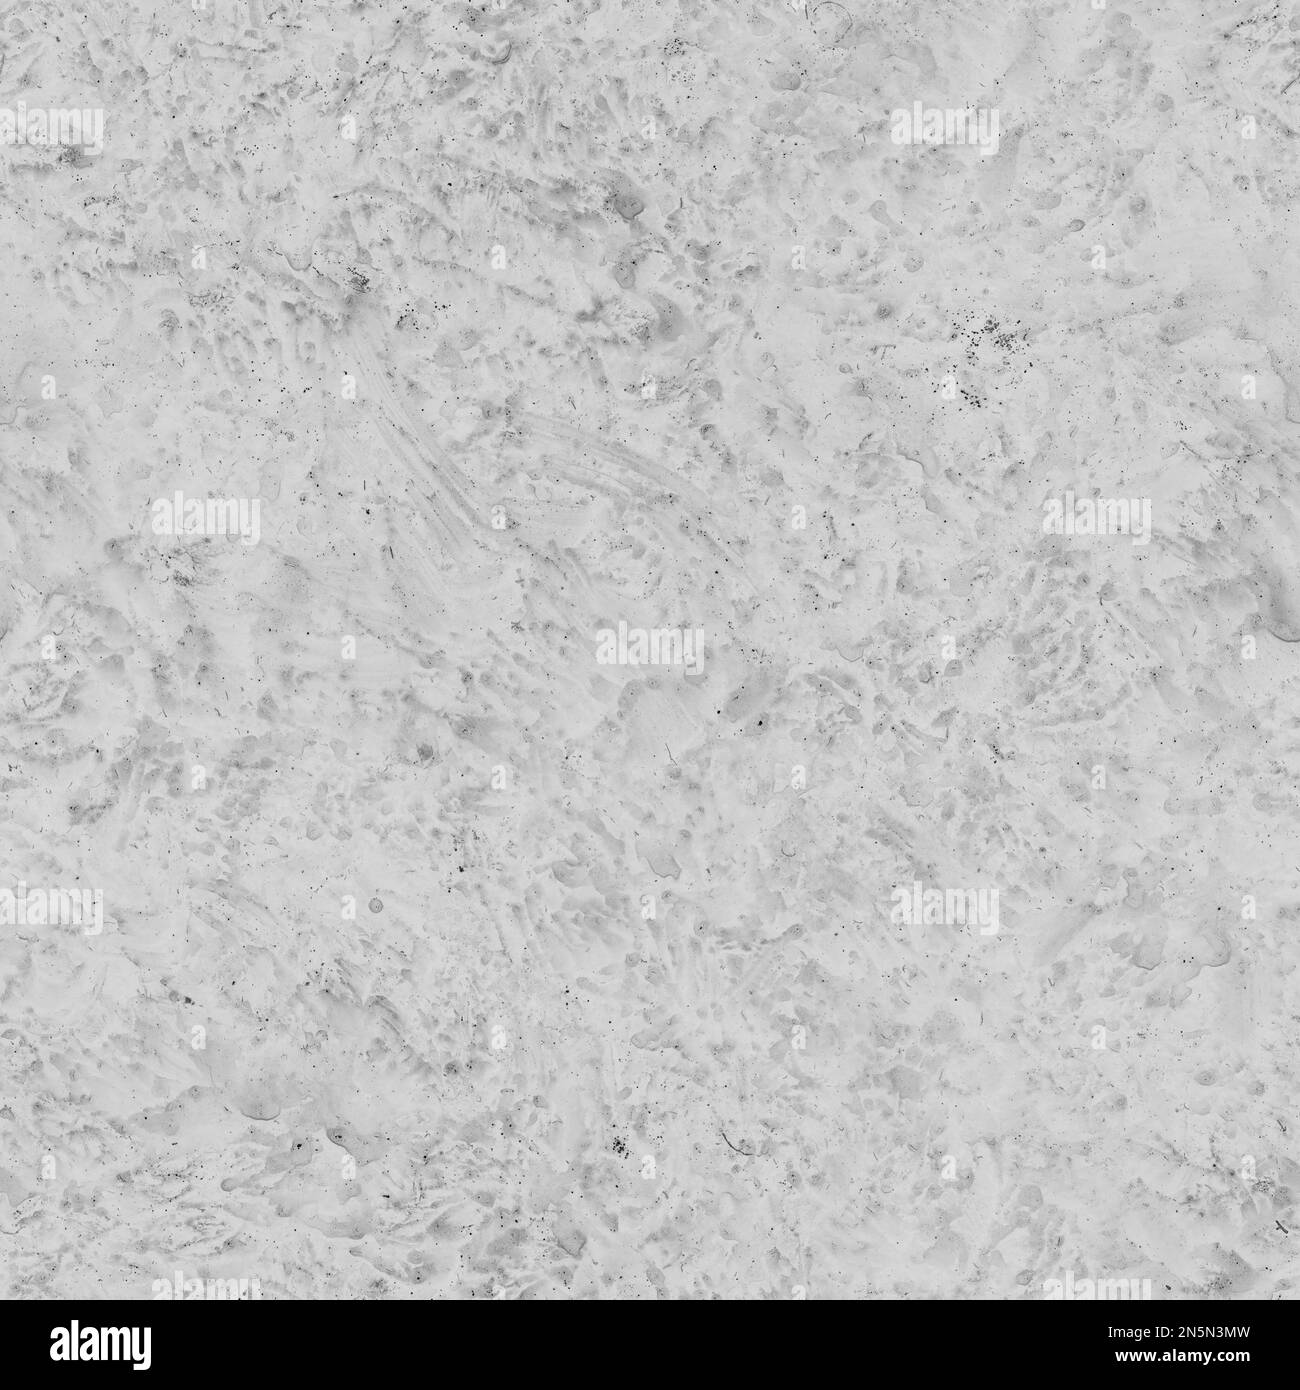 Bump map and displacement map stains Texture, stains bump mapping Stock Photo